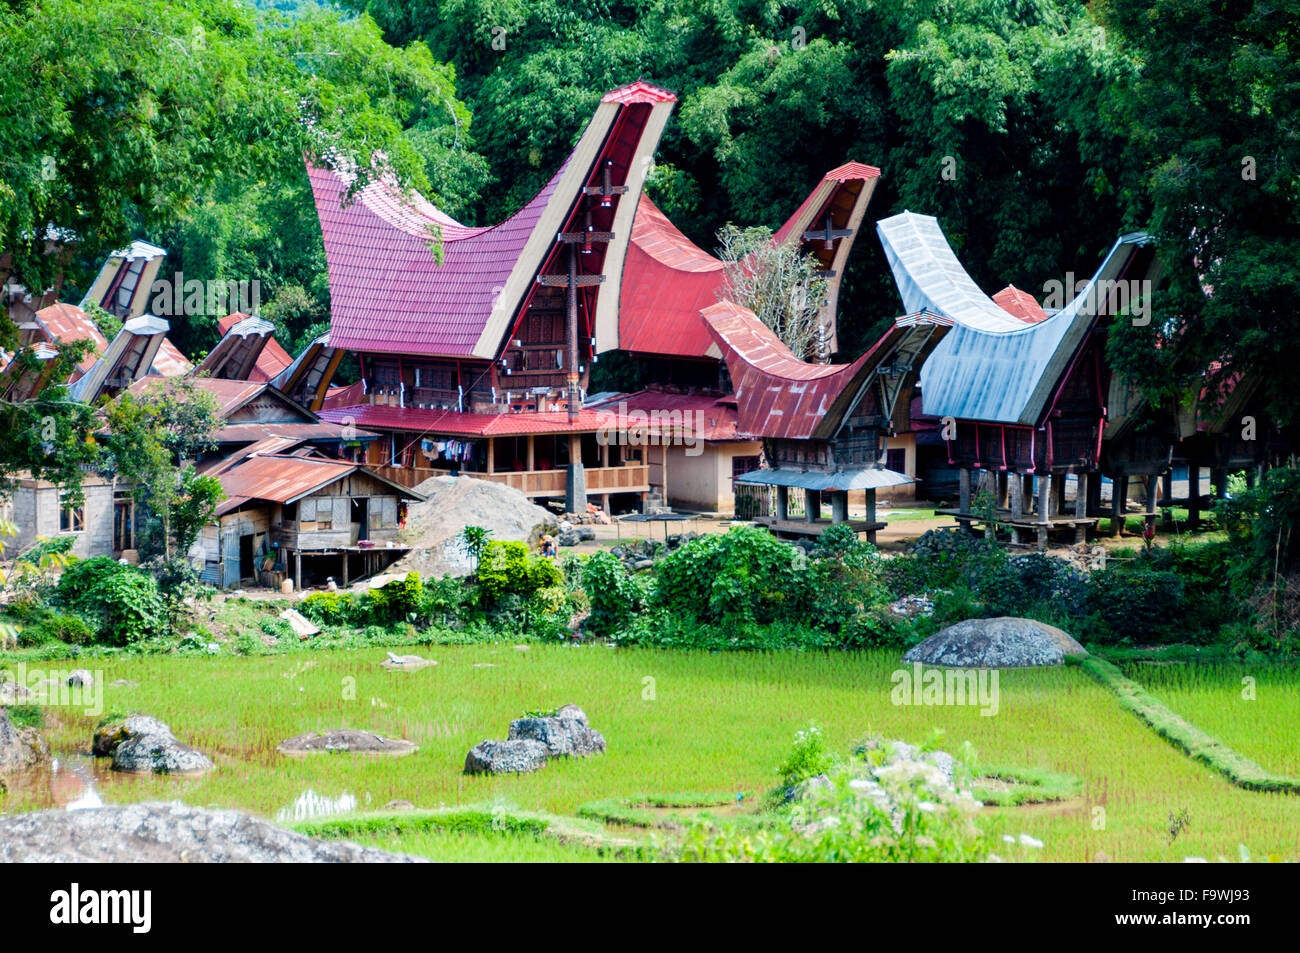 The Village with traditional and colorful houses of Tana Toraja Stock Photo